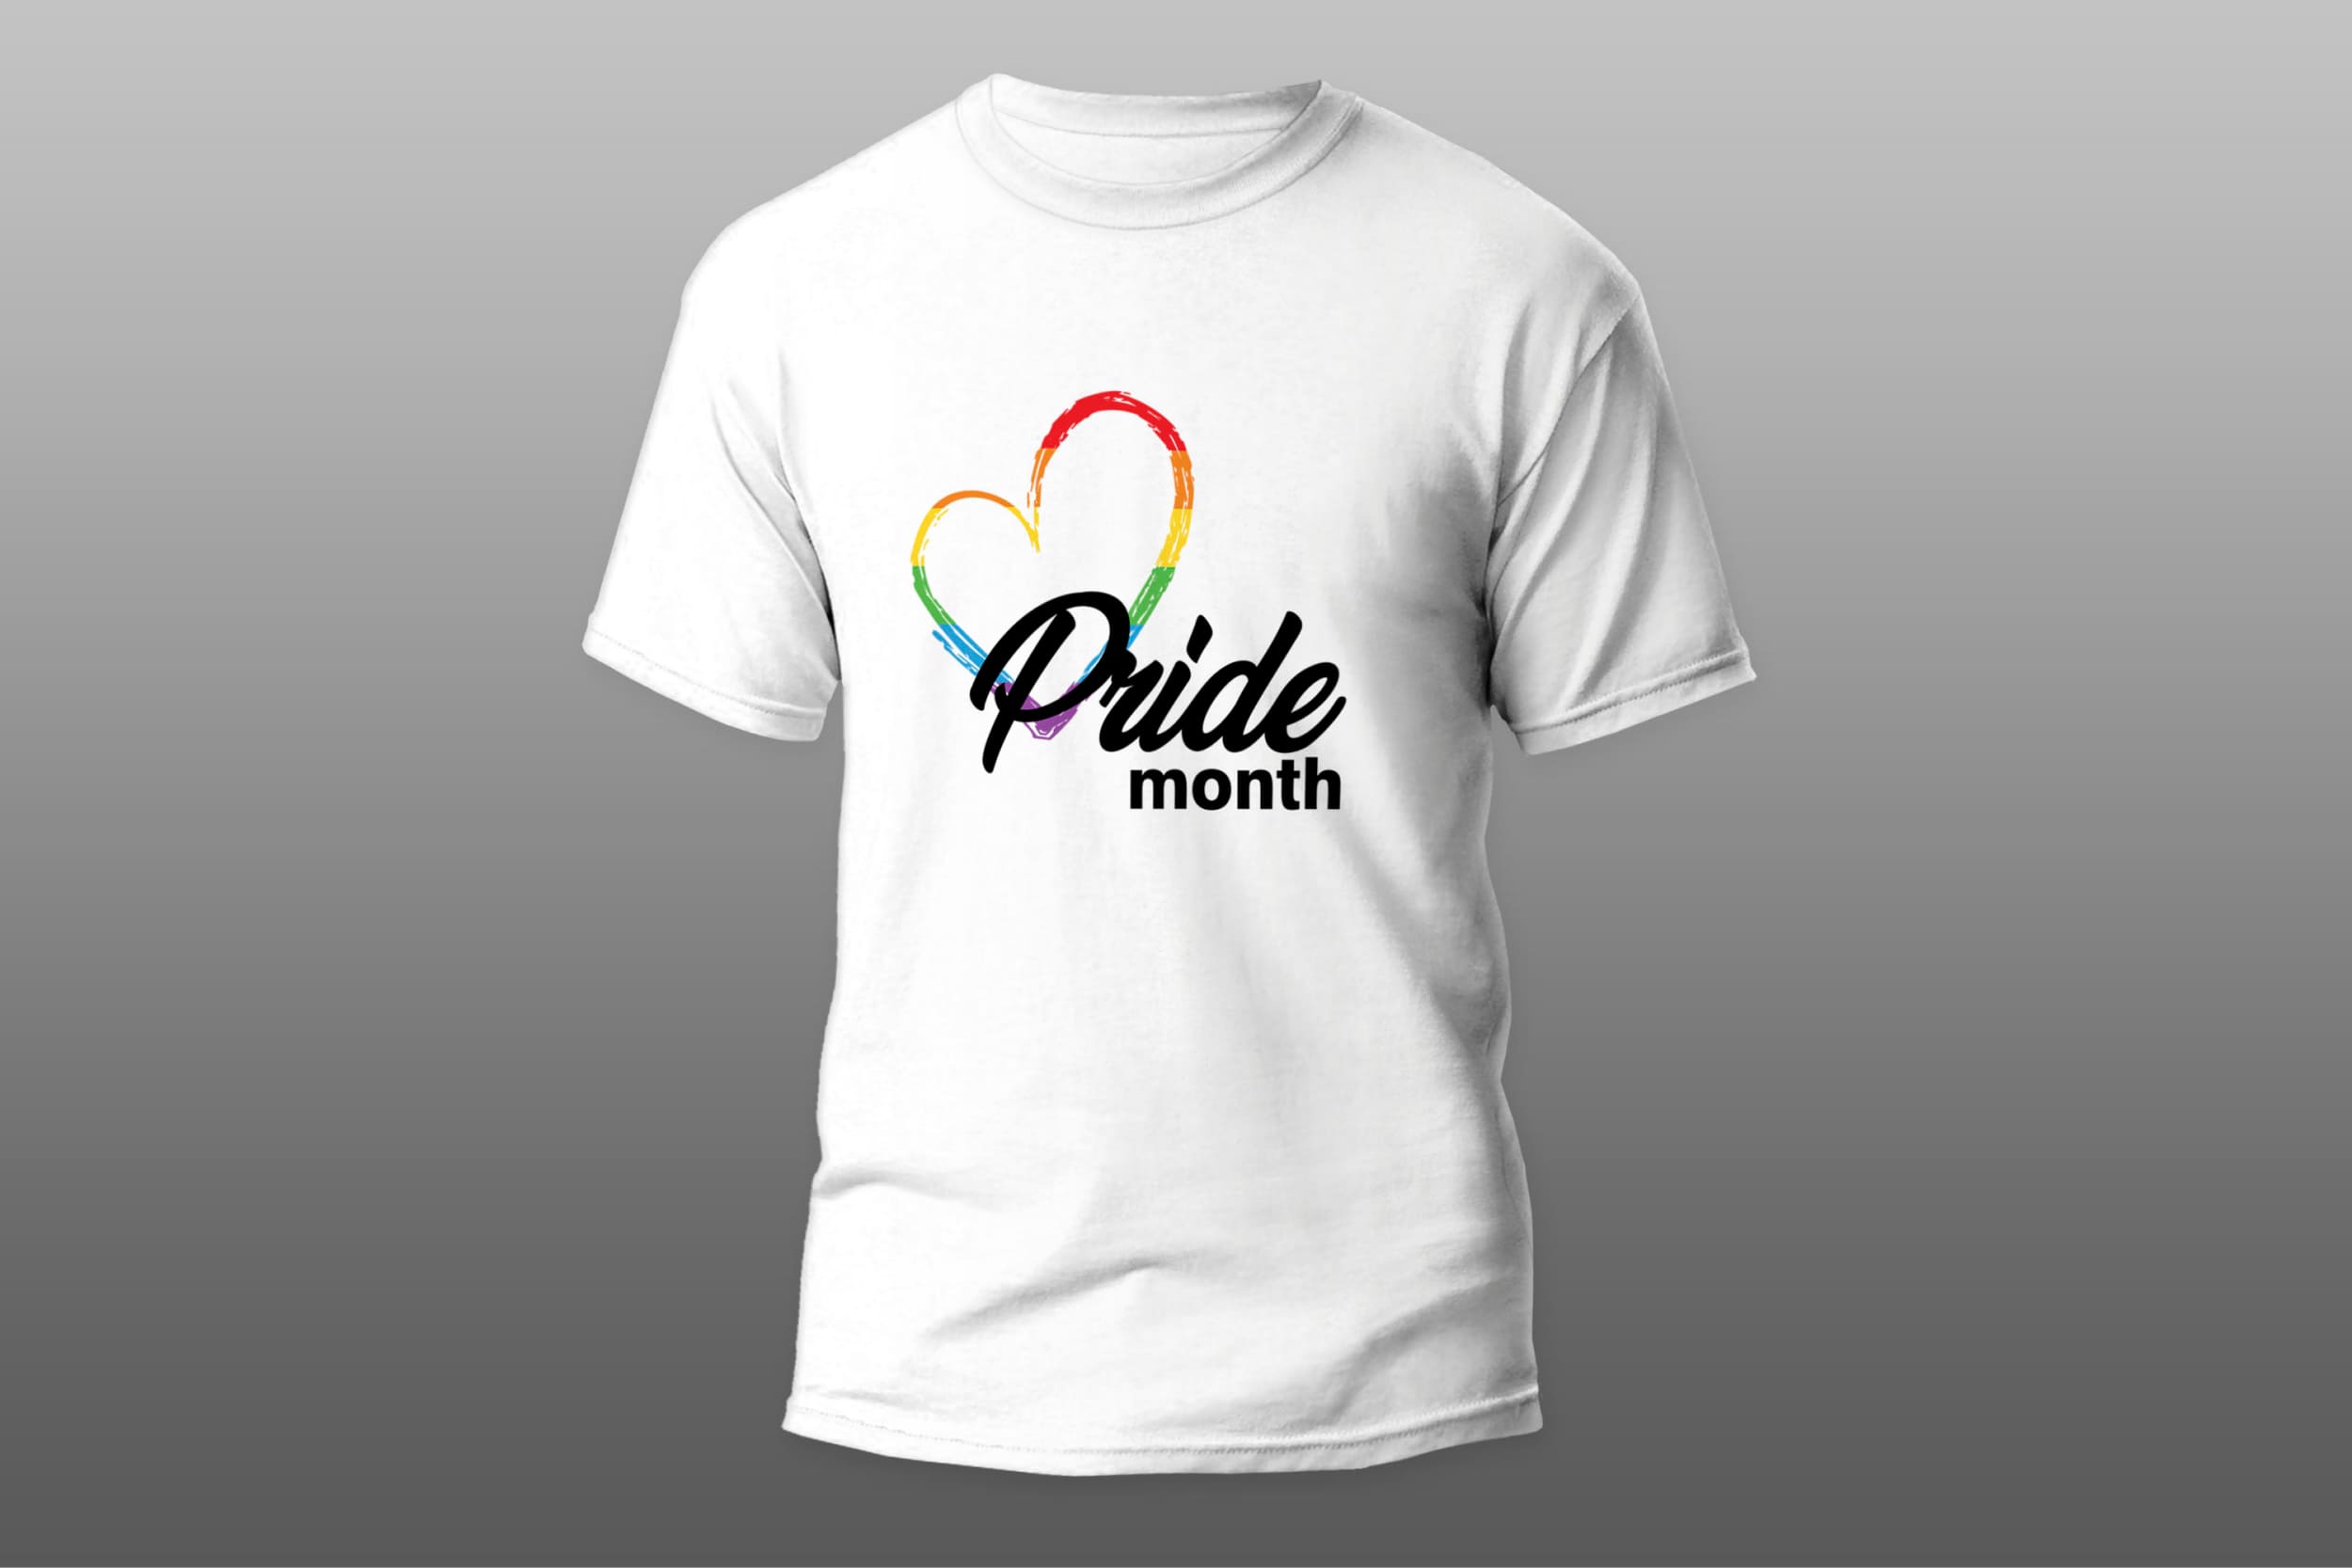 White t-shirt with a black "Pride month" lettering and a heart in the colors of the LGBT flag on a gray background.